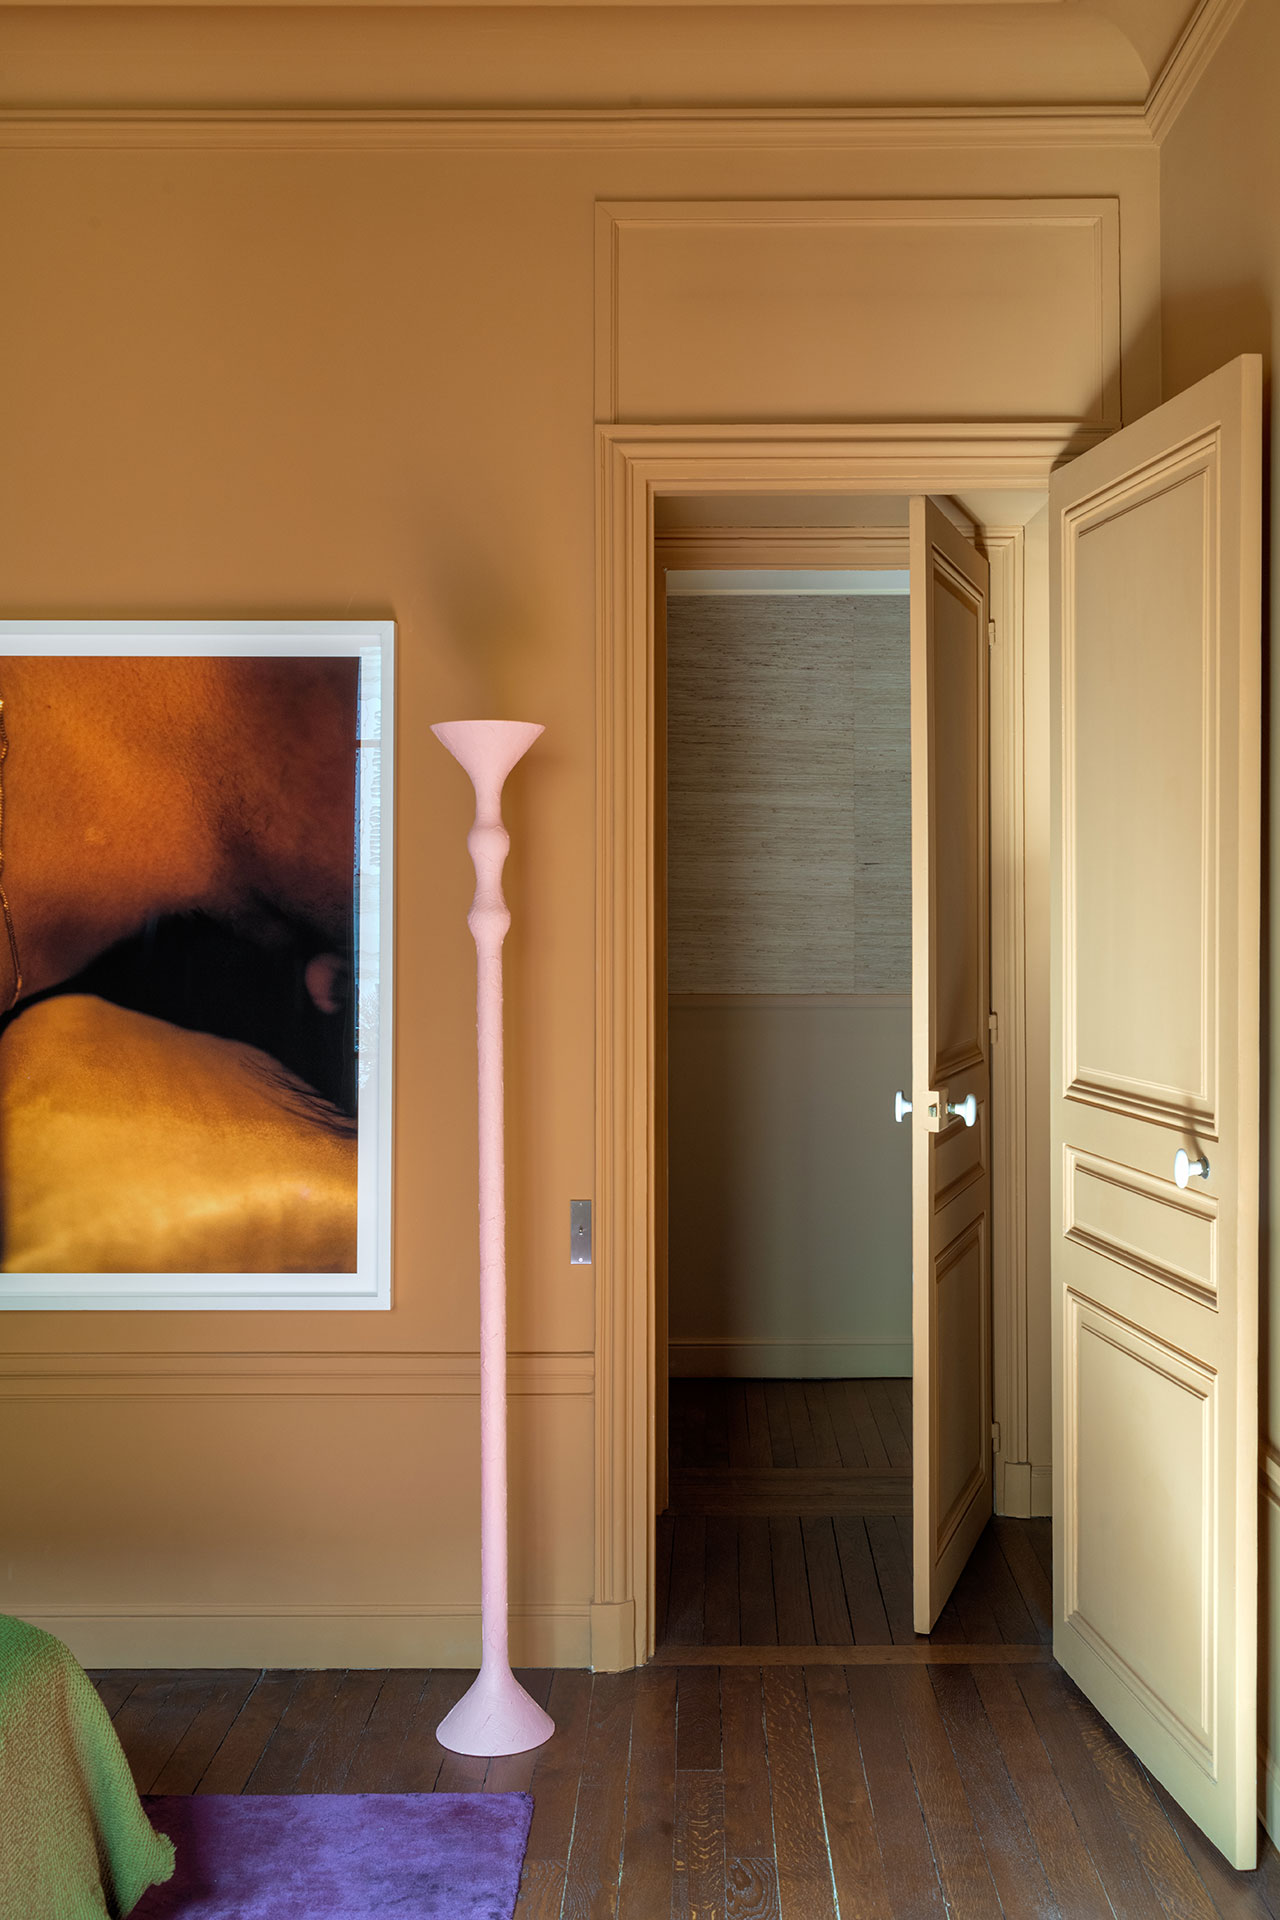 Photography by Giulio Ghirardi.
Featured: Framed photograph by Walter Pfeiffer (Sultana gallery); 'Golosa' floor lamp by Rodolphe Parente.